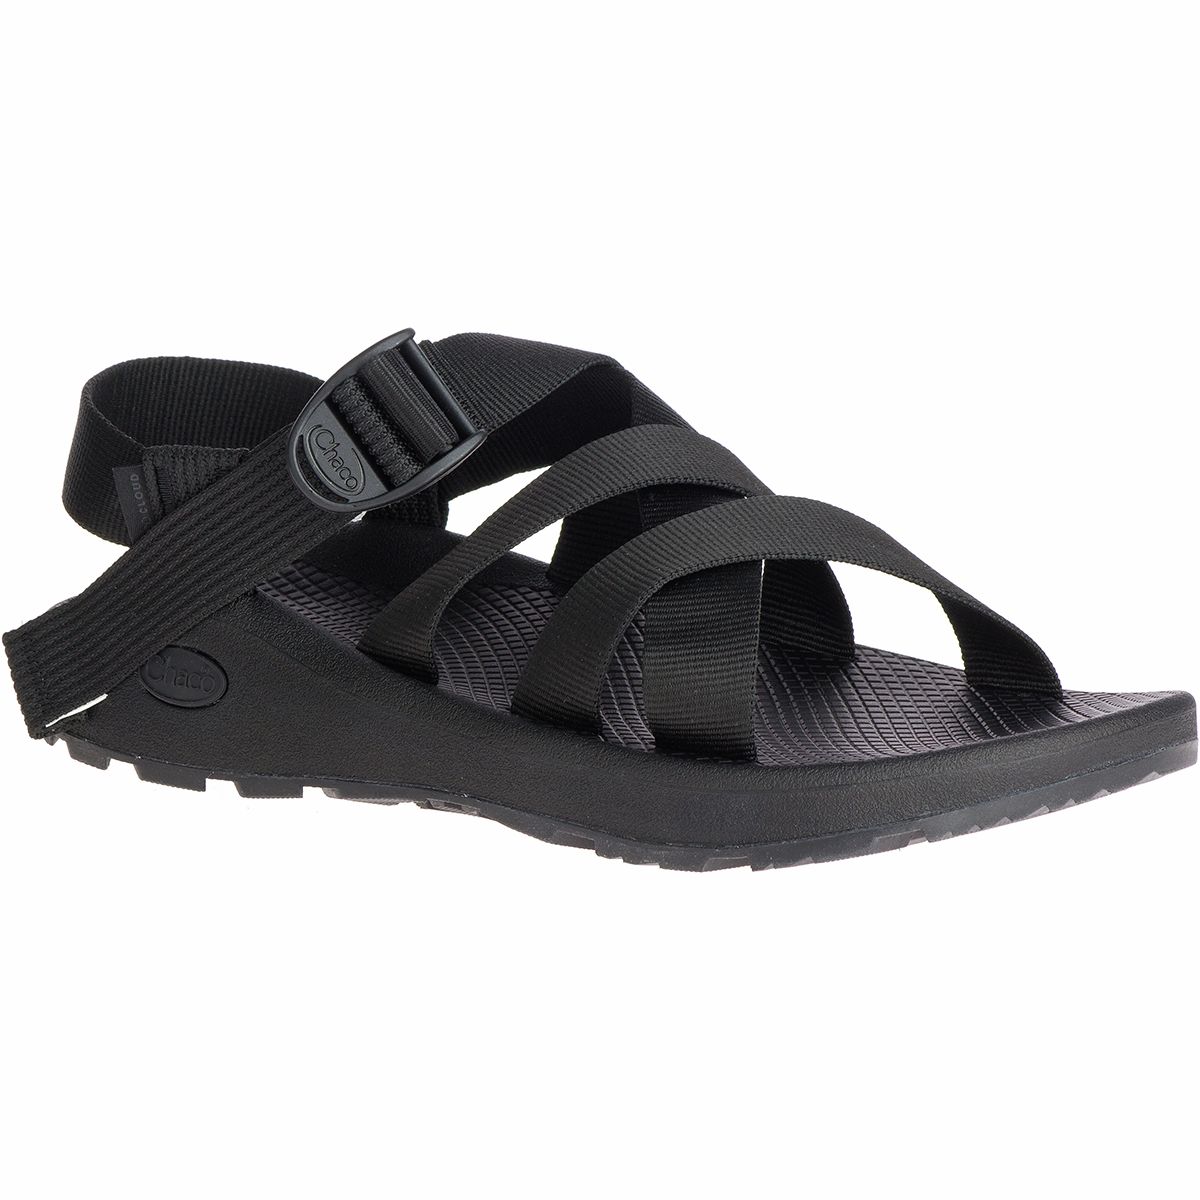 Chaco Banded Z/Cloud Sandal - Men's | Backcountry.com